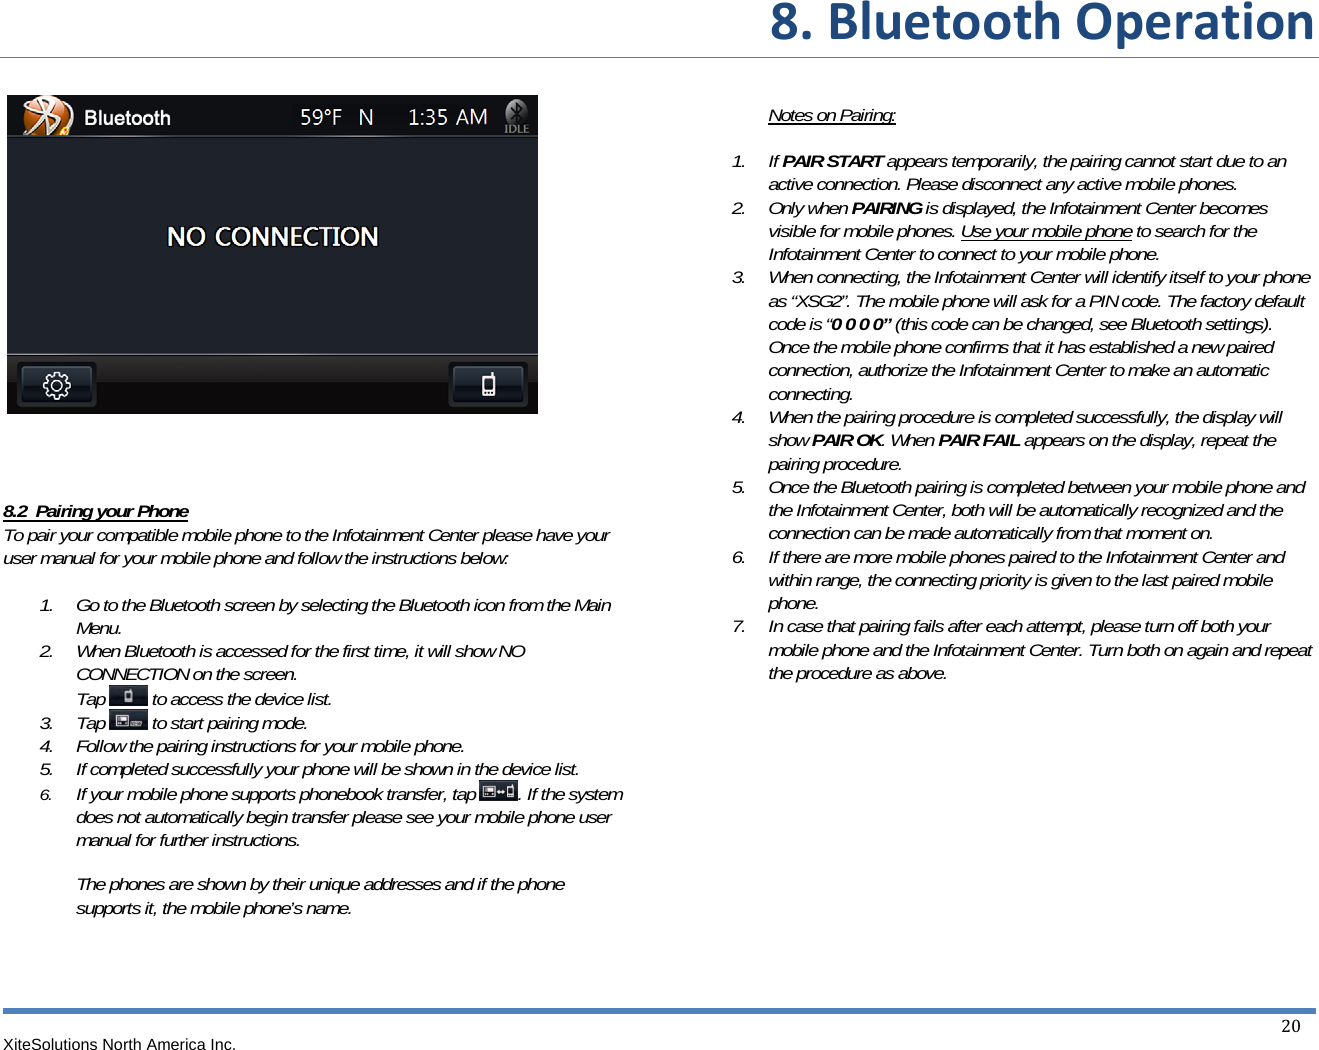 8.BluetoothOperationXiteSolutions North America Inc.  20          8.2  Pairing your Phone To pair your compatible mobile phone to the Infotainment Center please have your user manual for your mobile phone and follow the instructions below:  1. Go to the Bluetooth screen by selecting the Bluetooth icon from the Main Menu. 2. When Bluetooth is accessed for the first time, it will show NO CONNECTION on the screen. Tap   to access the device list. 3. Tap   to start pairing mode. 4. Follow the pairing instructions for your mobile phone. 5. If completed successfully your phone will be shown in the device list. 6. If your mobile phone supports phonebook transfer, tap  . If the system does not automatically begin transfer please see your mobile phone user manual for further instructions.   The phones are shown by their unique addresses and if the phone supports it, the mobile phone’s name.      Notes on Pairing:   1. If PAIR START appears temporarily, the pairing cannot start due to an active connection. Please disconnect any active mobile phones. 2. Only when PAIRING is displayed, the Infotainment Center becomes visible for mobile phones. Use your mobile phone to search for the Infotainment Center to connect to your mobile phone. 3. When connecting, the Infotainment Center will identify itself to your phone as “XSG2”. The mobile phone will ask for a PIN code. The factory default code is “0 0 0 0” (this code can be changed, see Bluetooth settings). Once the mobile phone confirms that it has established a new paired connection, authorize the Infotainment Center to make an automatic connecting. 4. When the pairing procedure is completed successfully, the display will show PAIR OK. When PAIR FAIL appears on the display, repeat the pairing procedure. 5. Once the Bluetooth pairing is completed between your mobile phone and the Infotainment Center, both will be automatically recognized and the connection can be made automatically from that moment on. 6. If there are more mobile phones paired to the Infotainment Center and within range, the connecting priority is given to the last paired mobile phone. 7. In case that pairing fails after each attempt, please turn off both your mobile phone and the Infotainment Center. Turn both on again and repeat the procedure as above.            